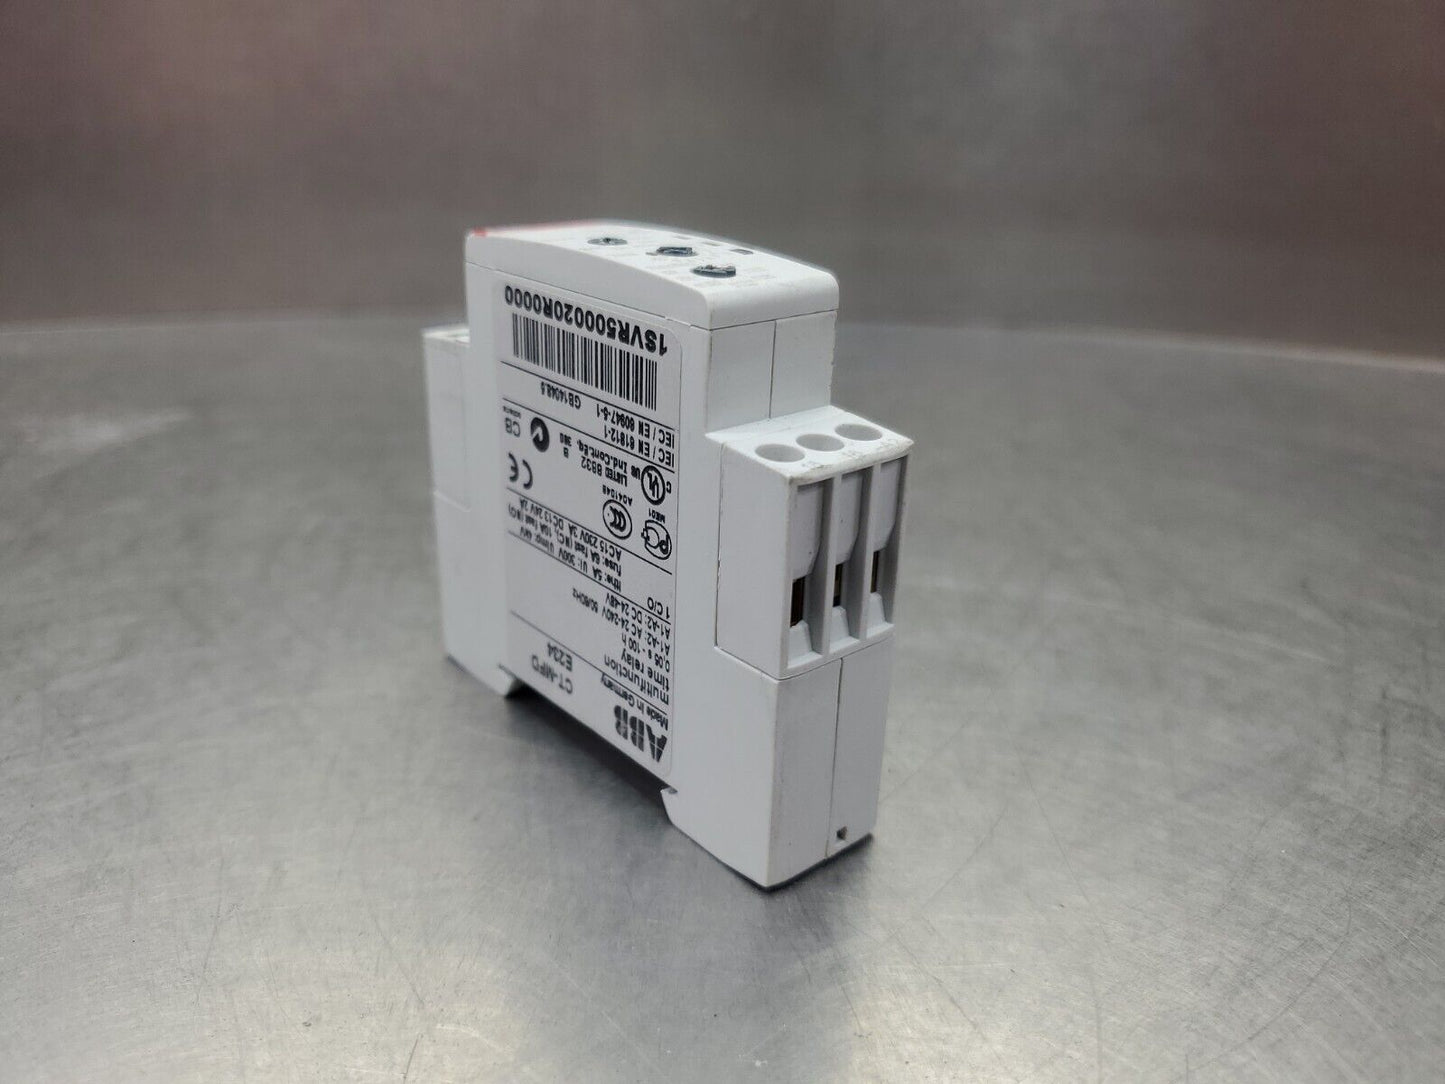 ABB CT-MFD E234 (1SVR500020R0000) Multifunction Time Relay.                 4C-1